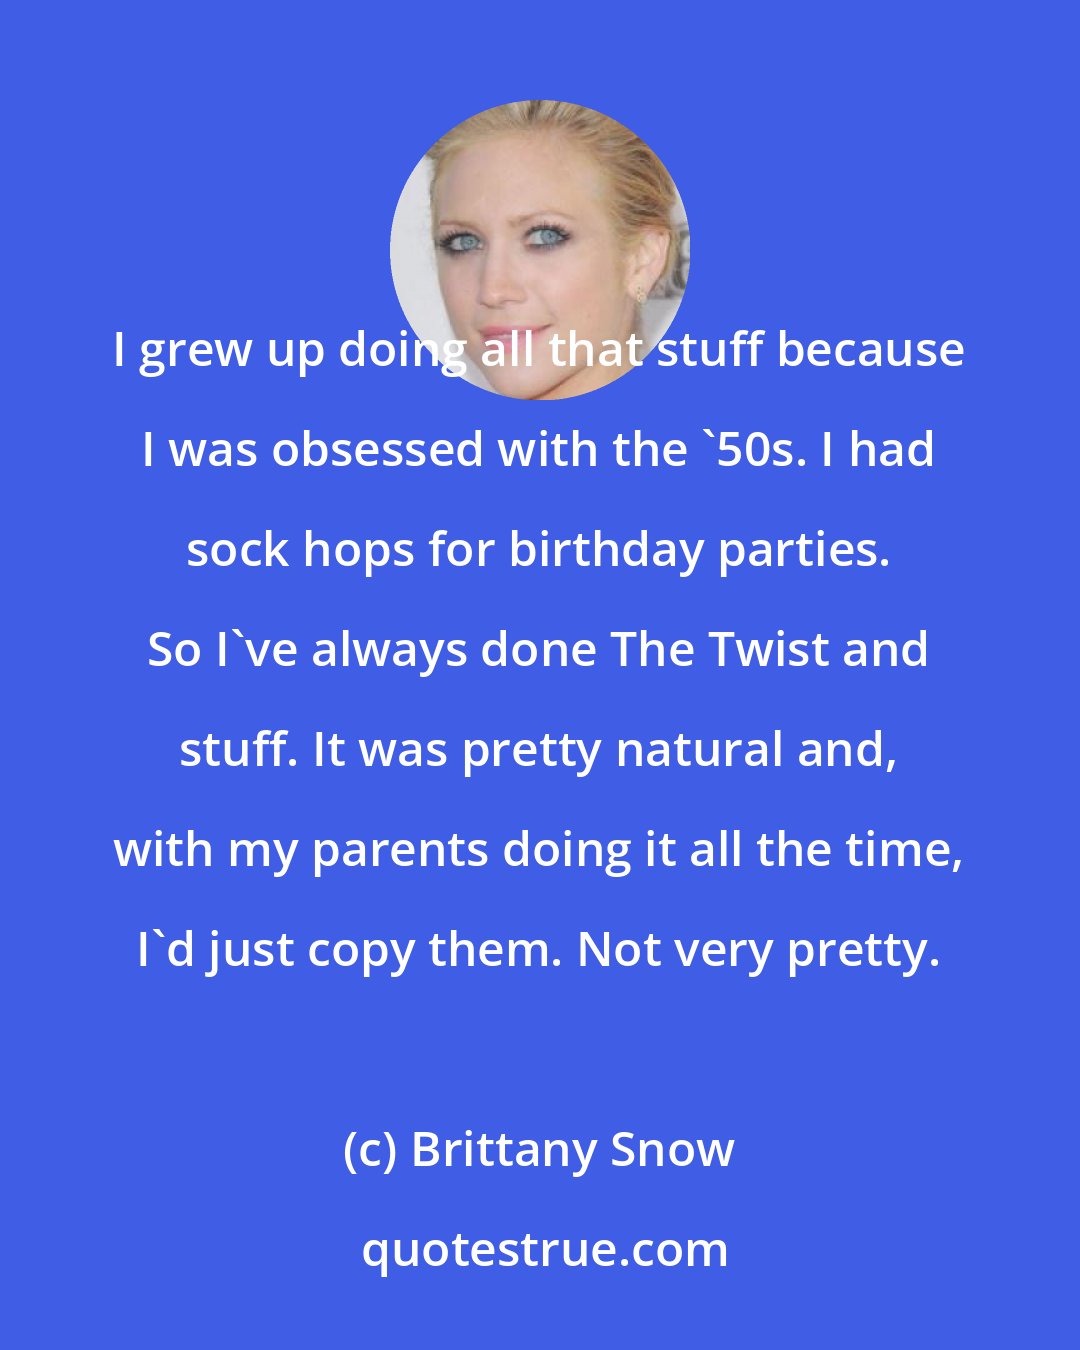 Brittany Snow: I grew up doing all that stuff because I was obsessed with the '50s. I had sock hops for birthday parties. So I've always done The Twist and stuff. It was pretty natural and, with my parents doing it all the time, I'd just copy them. Not very pretty.